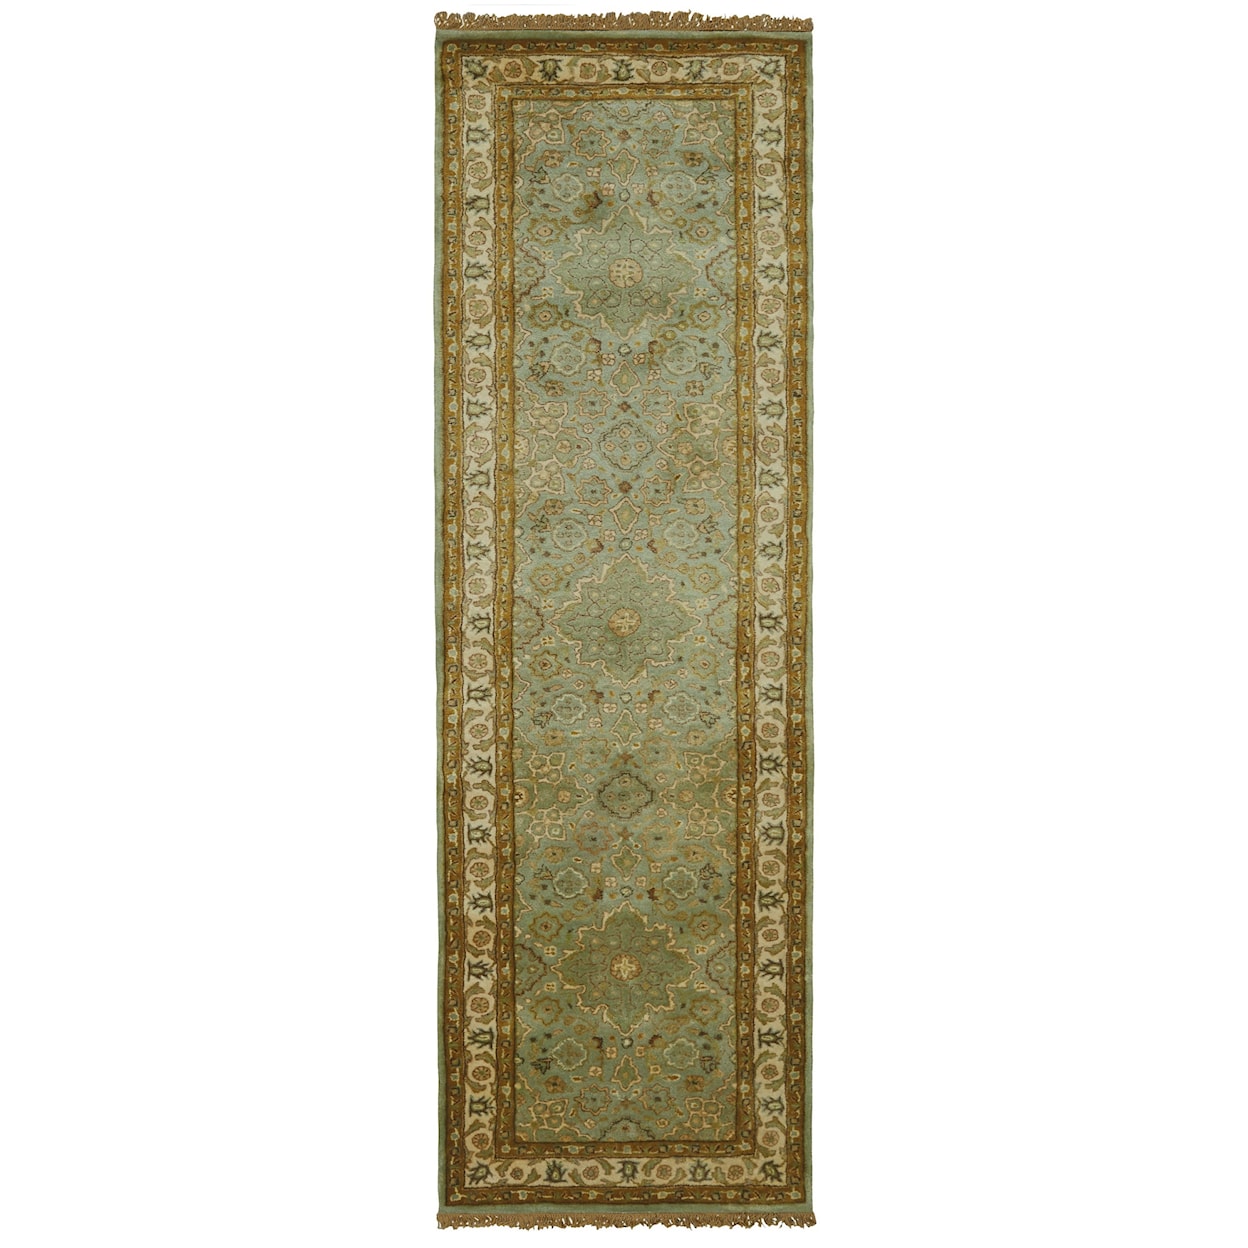 Feizy Rugs Amore Ocean/Beige 8' x 8' Round Area Rug